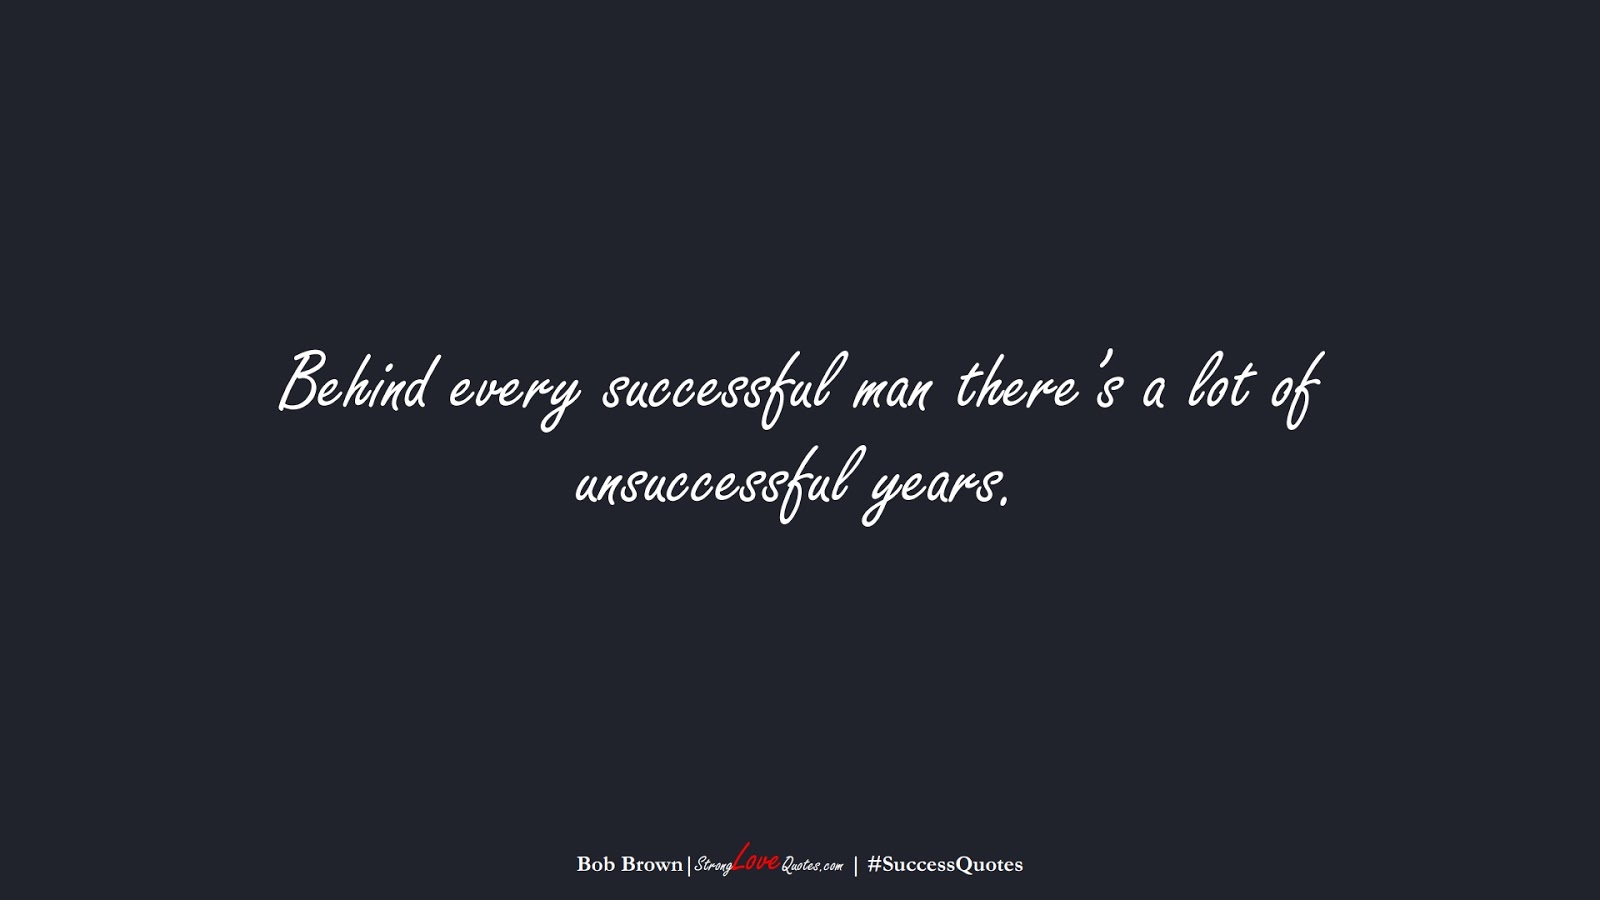 Behind every successful man there’s a lot of unsuccessful years. (Bob Brown);  #SuccessQuotes